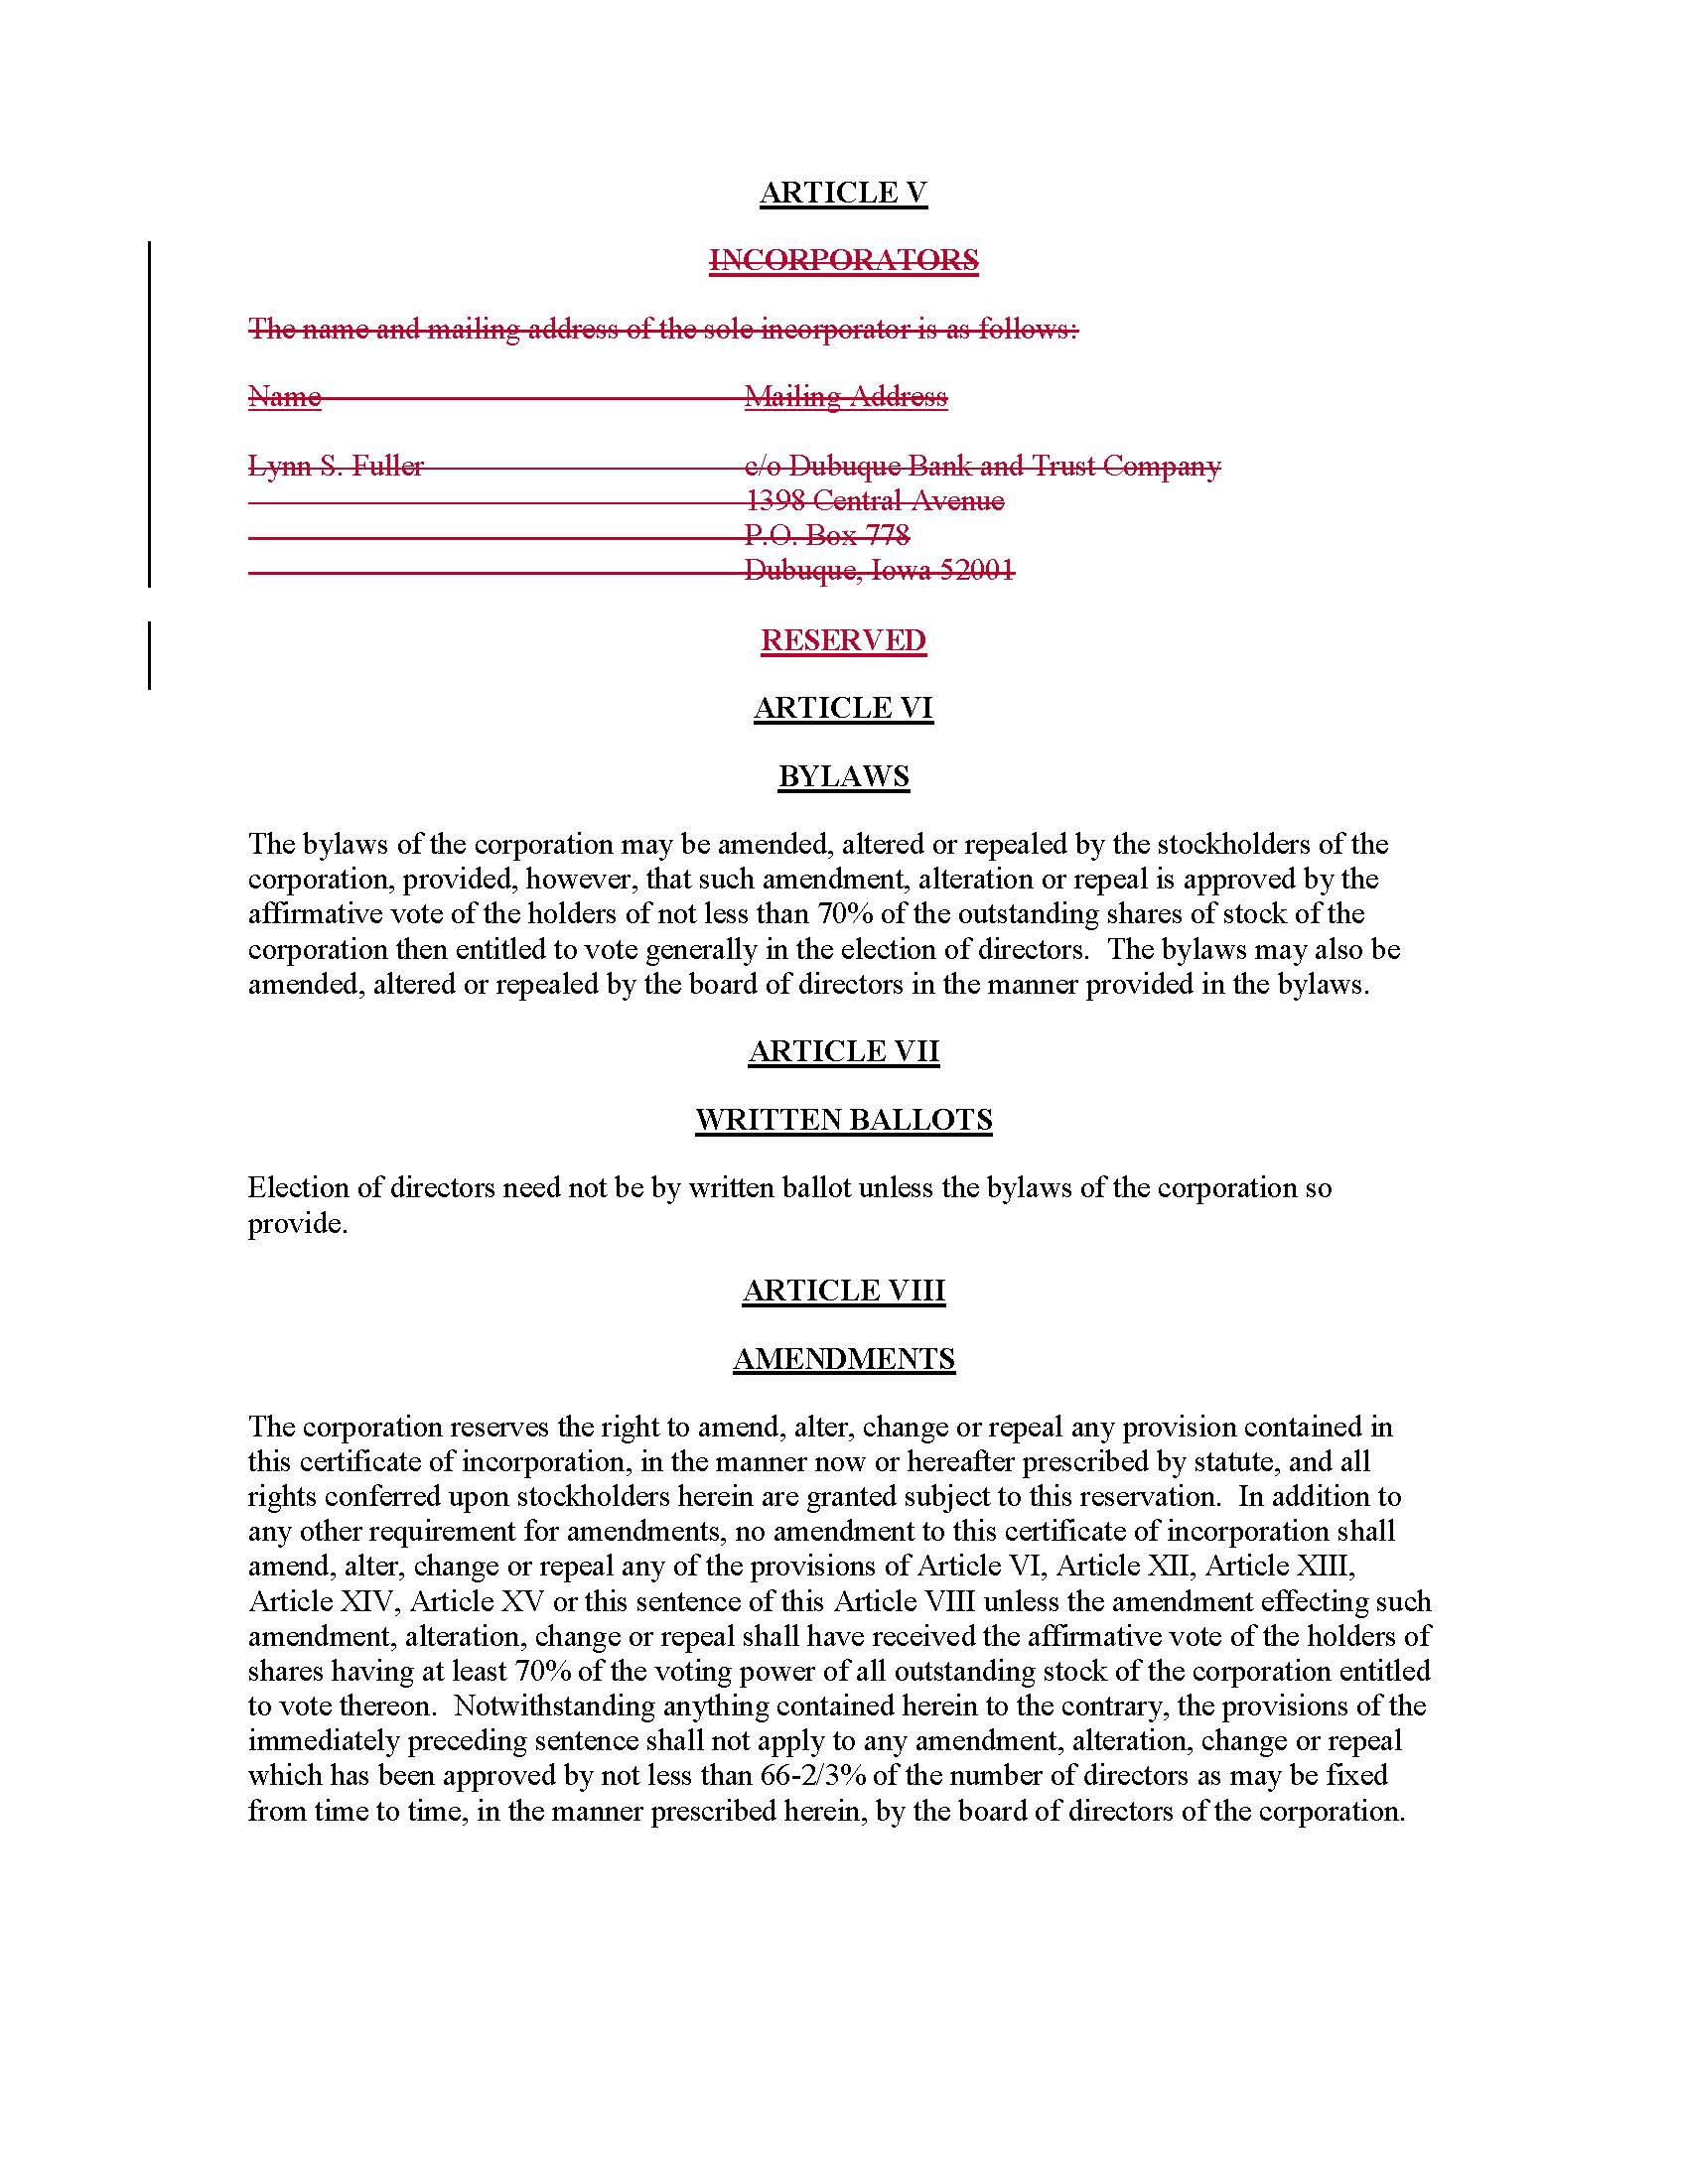 Amended and Restated Certificate of Incorporation (Redline) v.2_Page_2.jpg